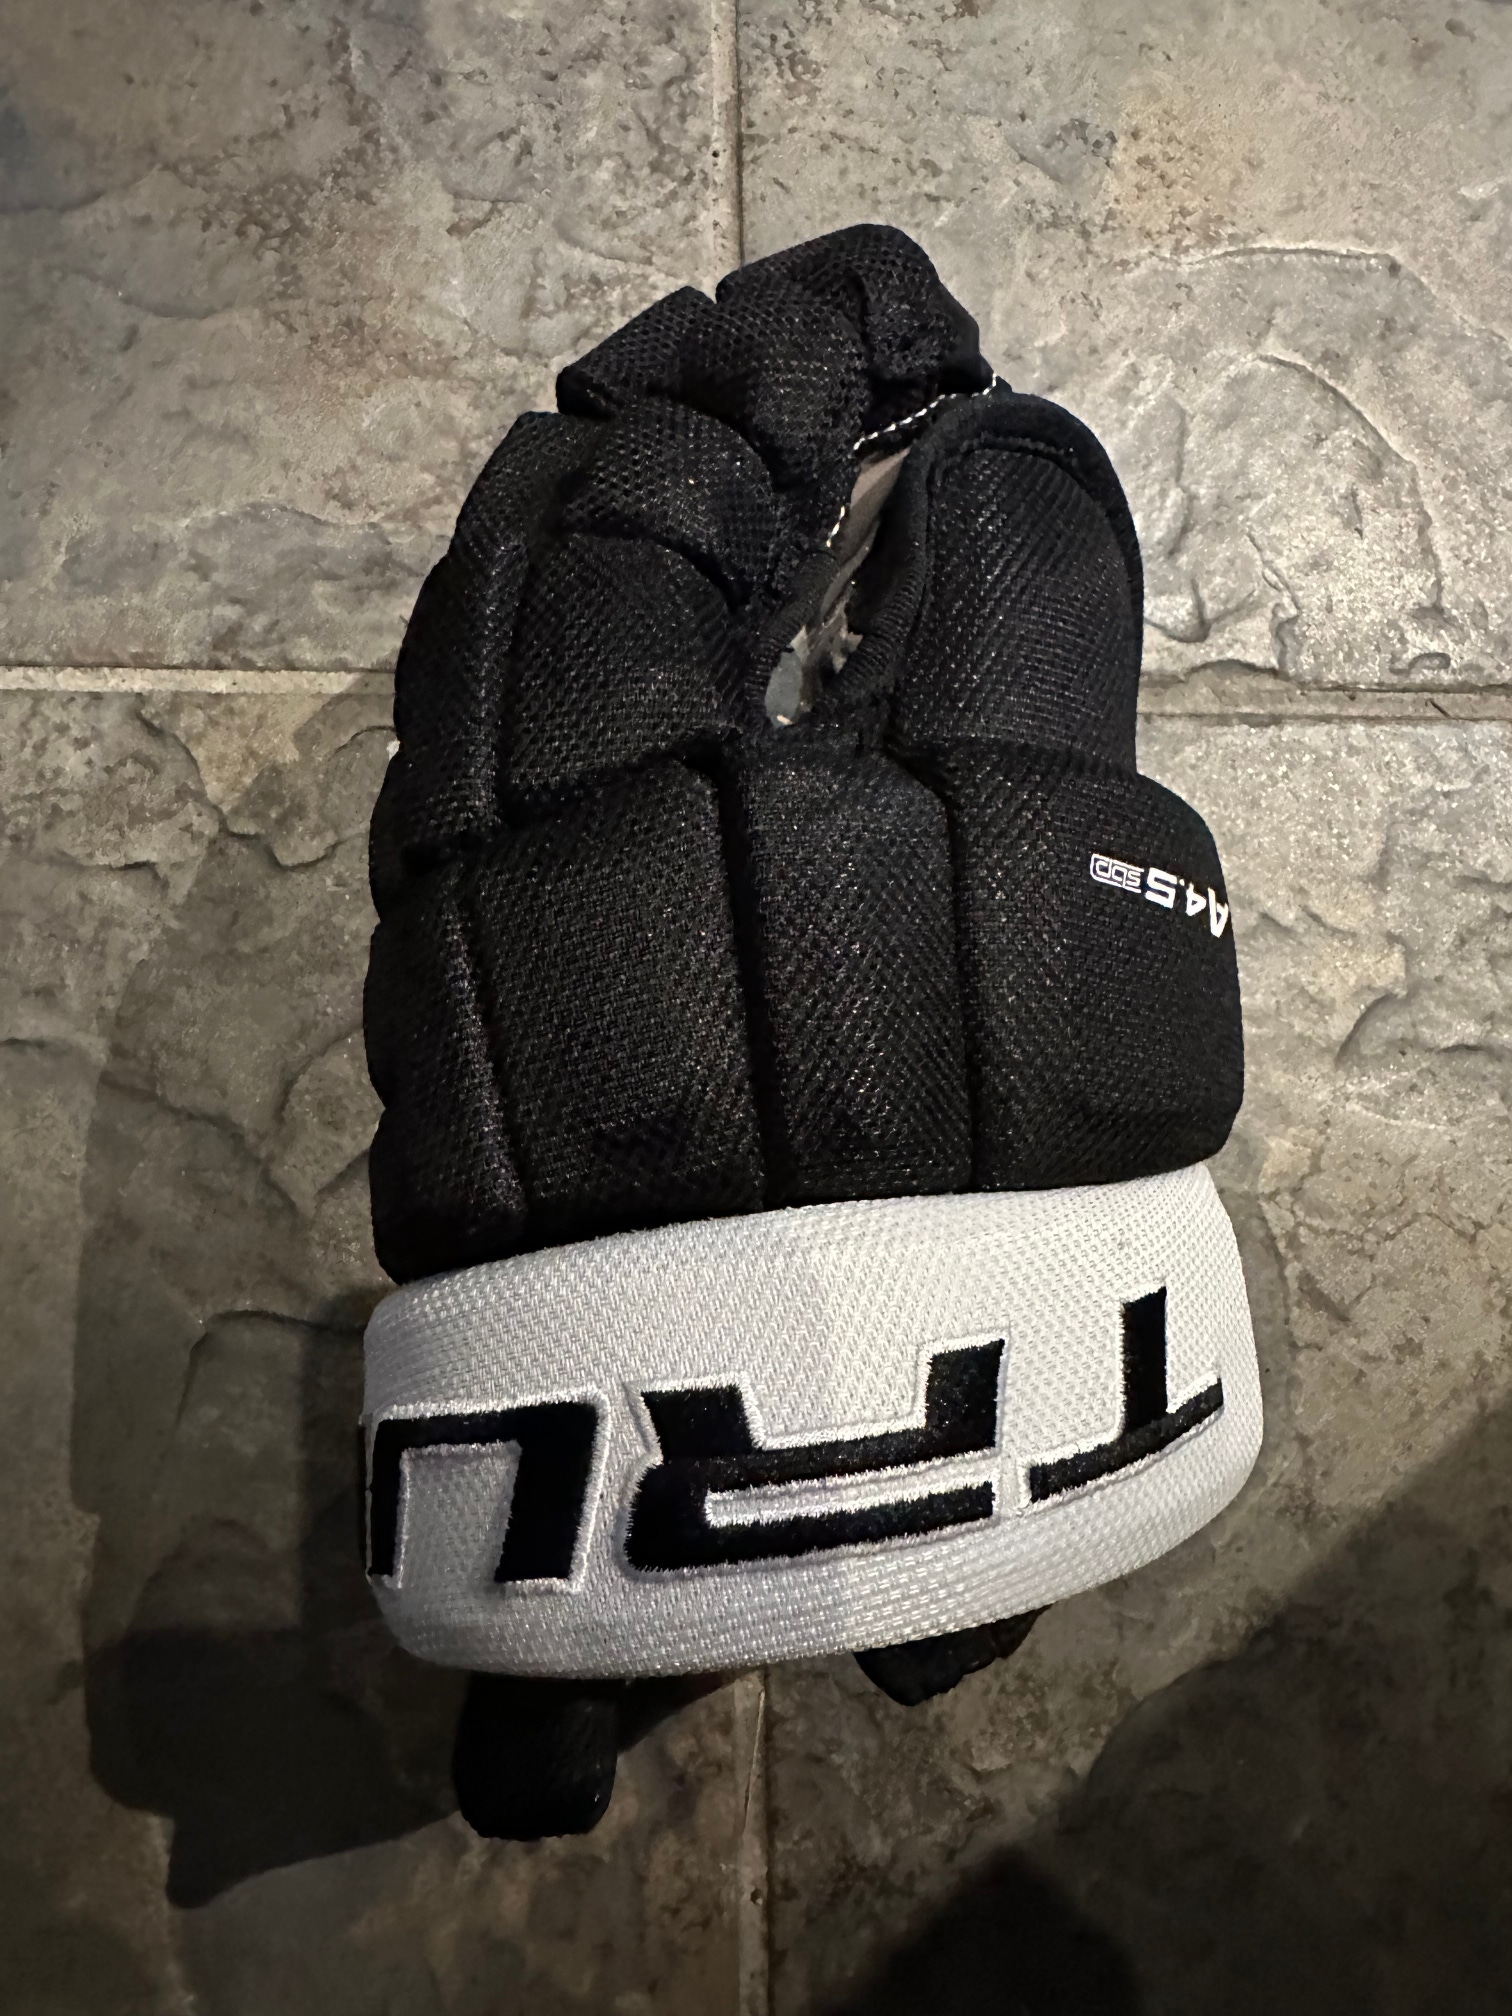 New True A4.5 Gloves 11" Black and White